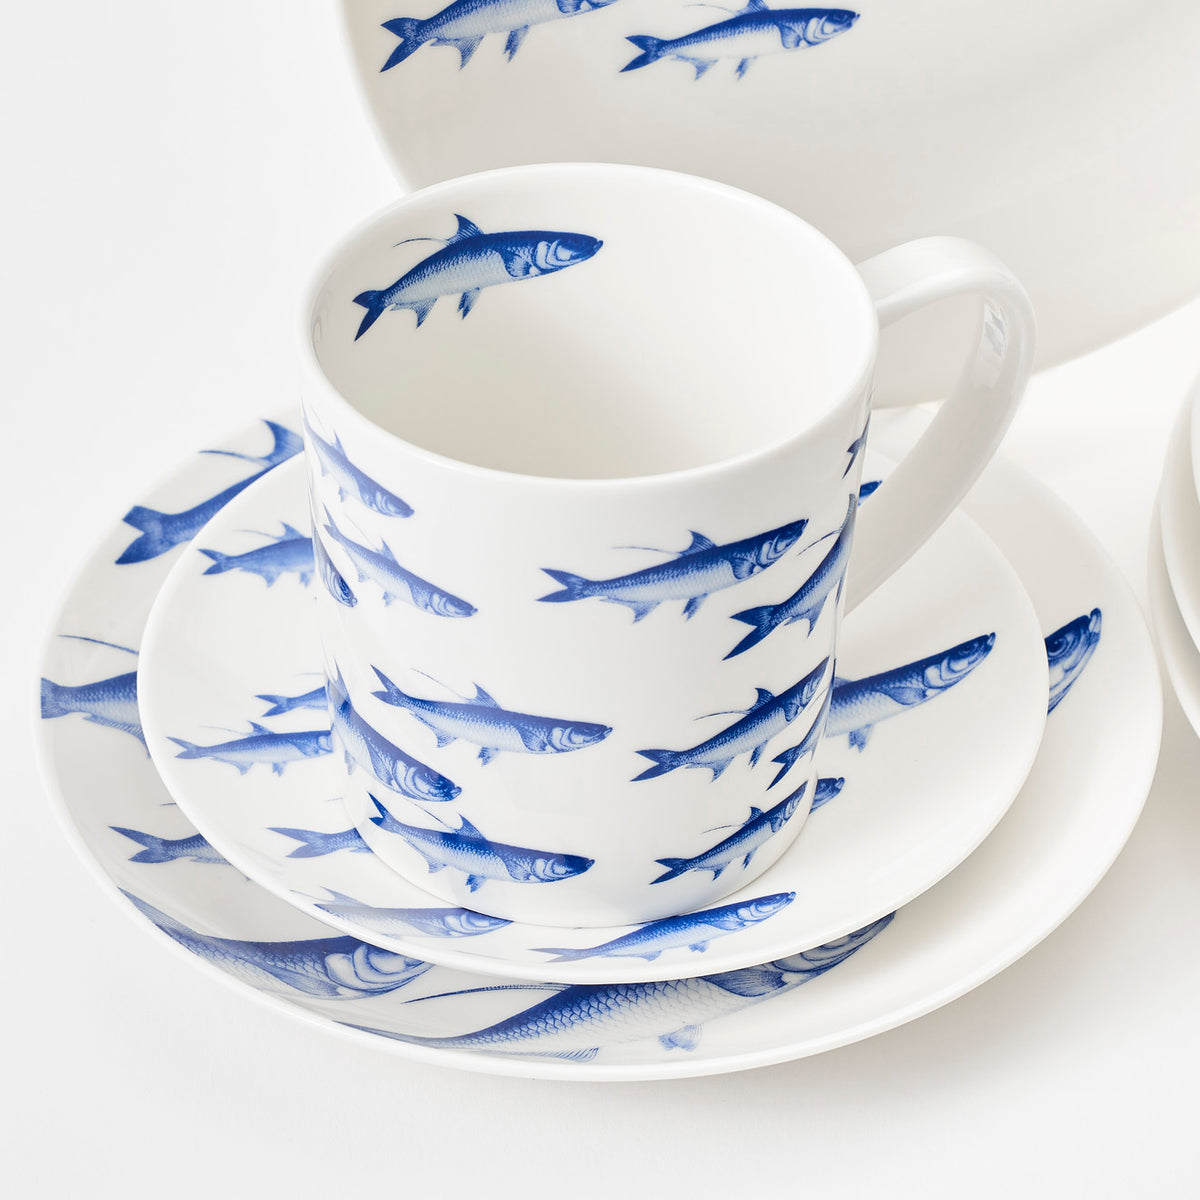 A set of small blue and white coastal School of Fish Canapé plates and cups by Caskata Artisanal Home.